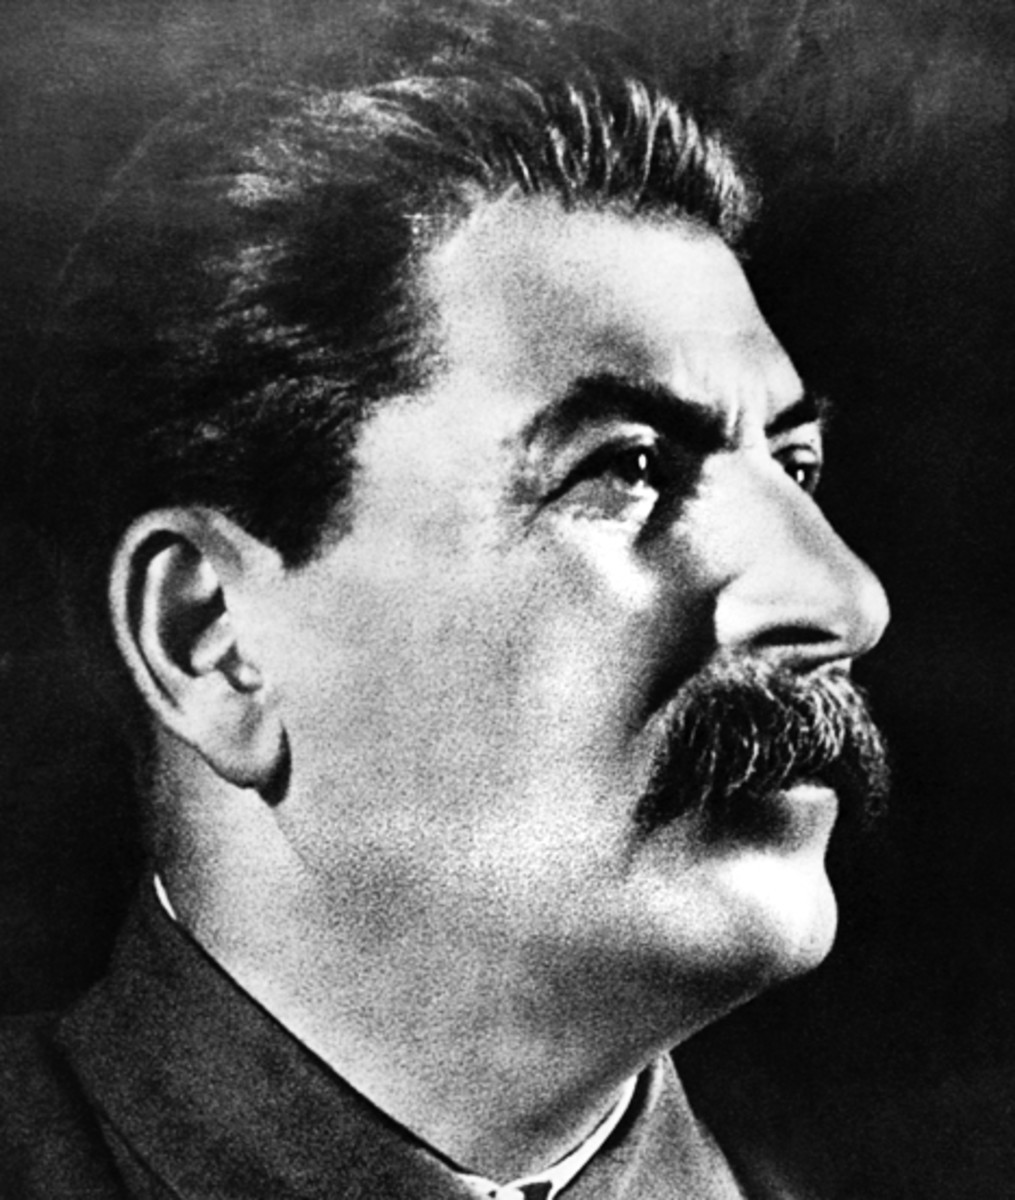 One of the many retouched(or photoshopped, in today's terms) photos of Stalin, which hid some facial defects, one of them being small pox scarring.